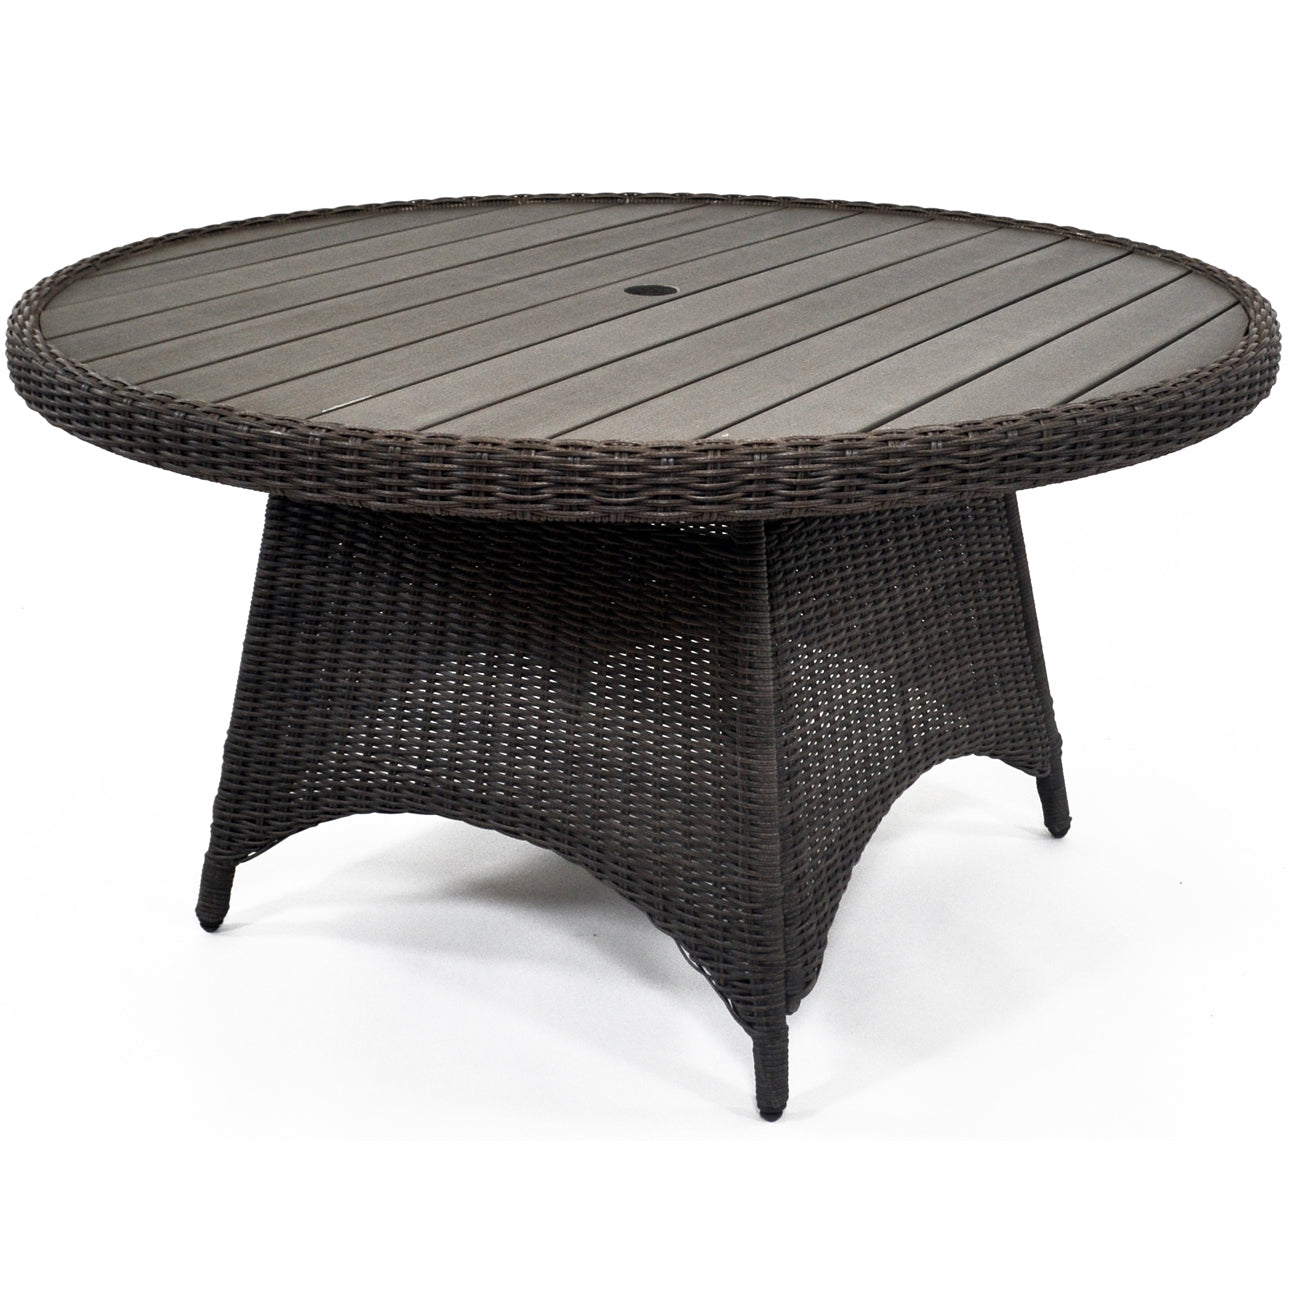 Palma Round Casual Dining Table